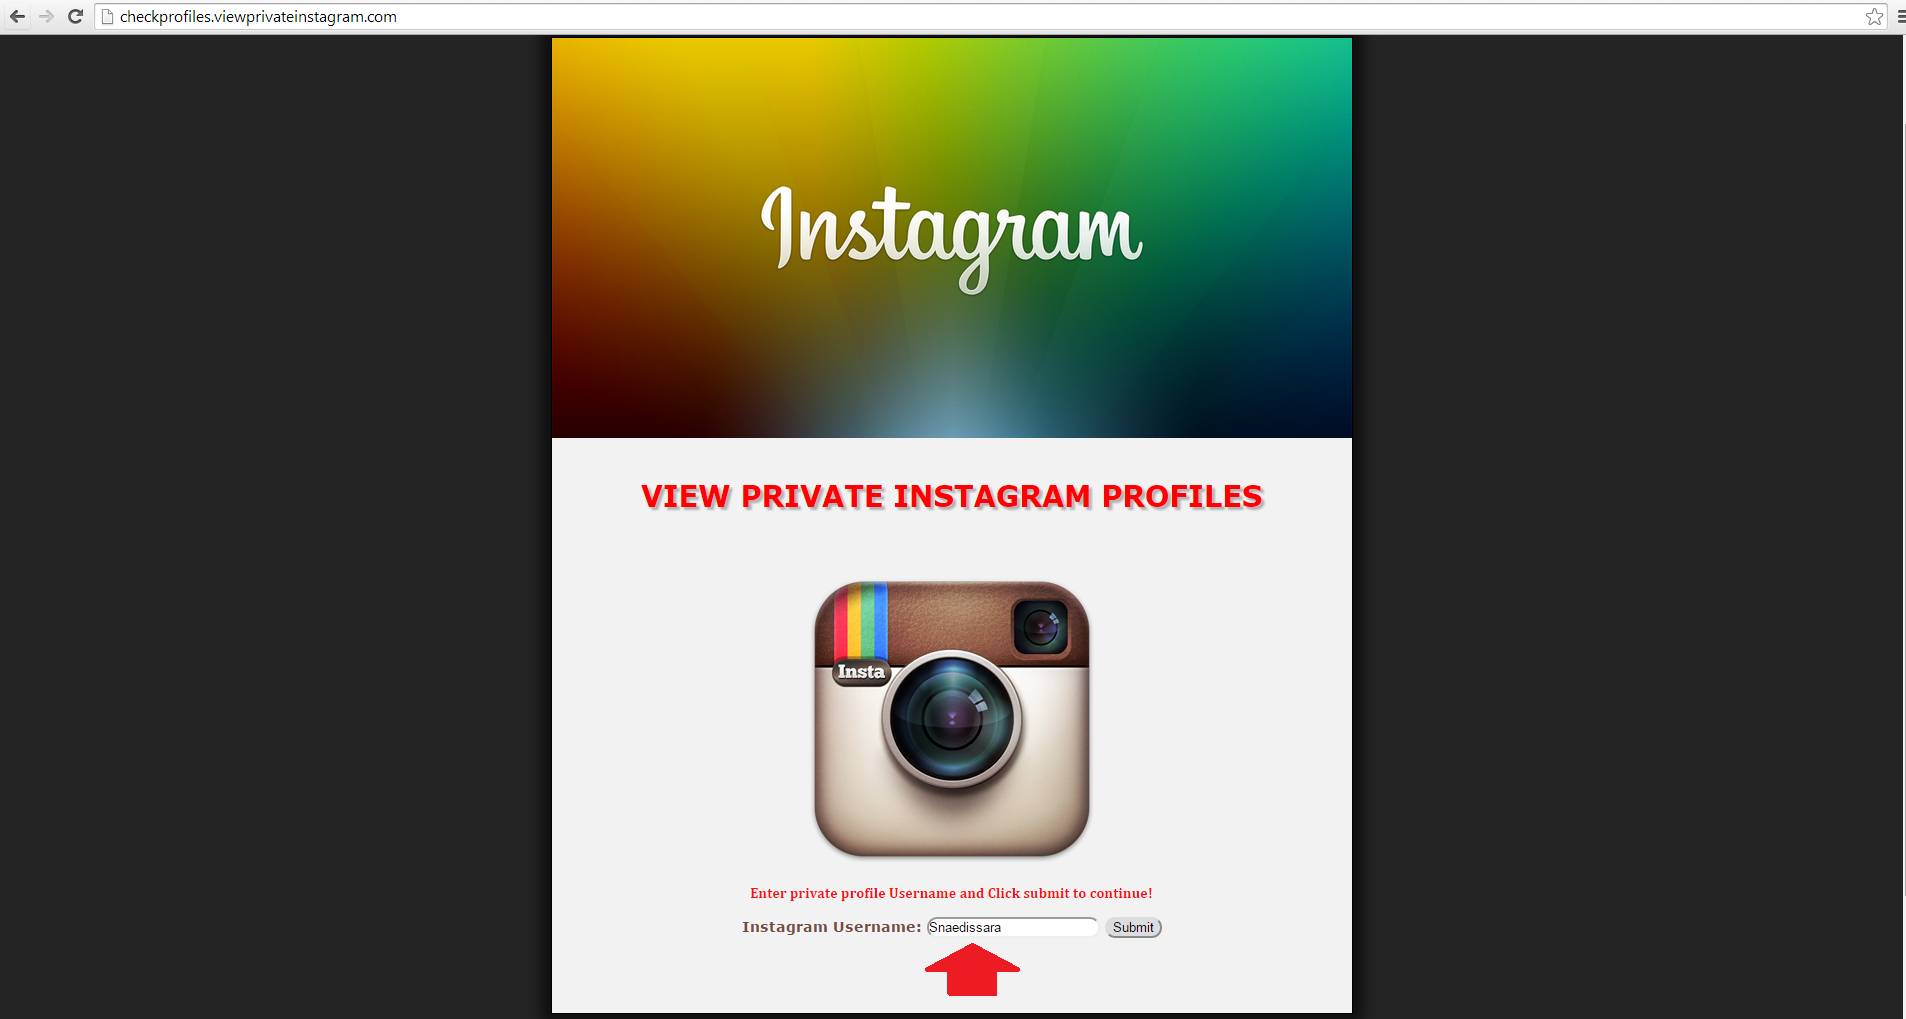 How to watch private instagram profiles